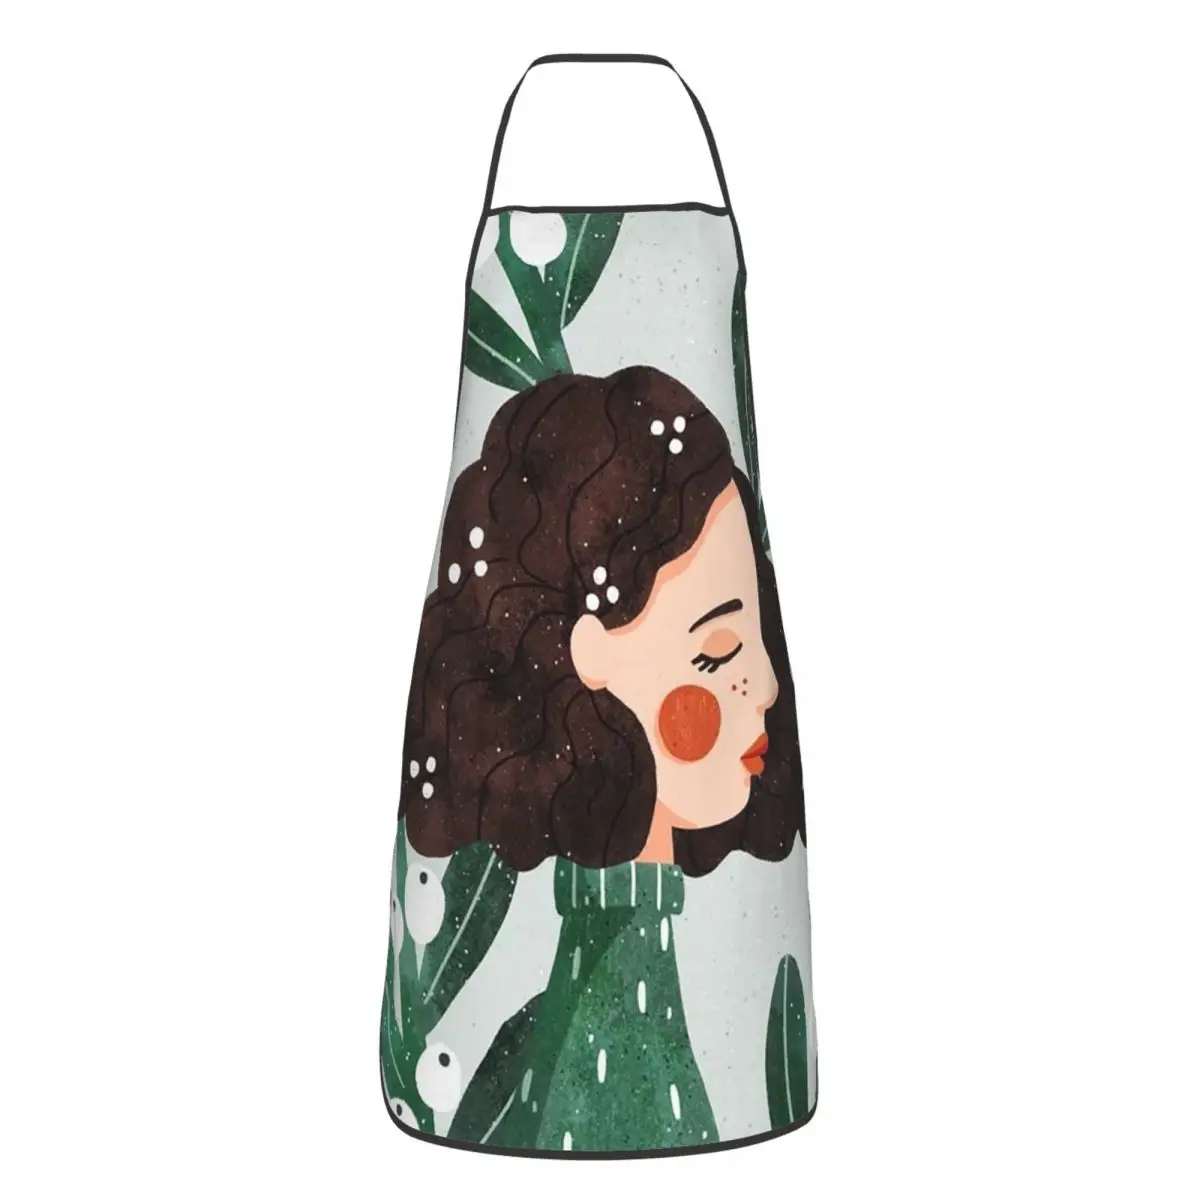 

Beauty Girl Apron Cuisine Cooking Baking Household Cleaning Gardening Jungle Aprons Kitchen Waterproof Pinafore Chef